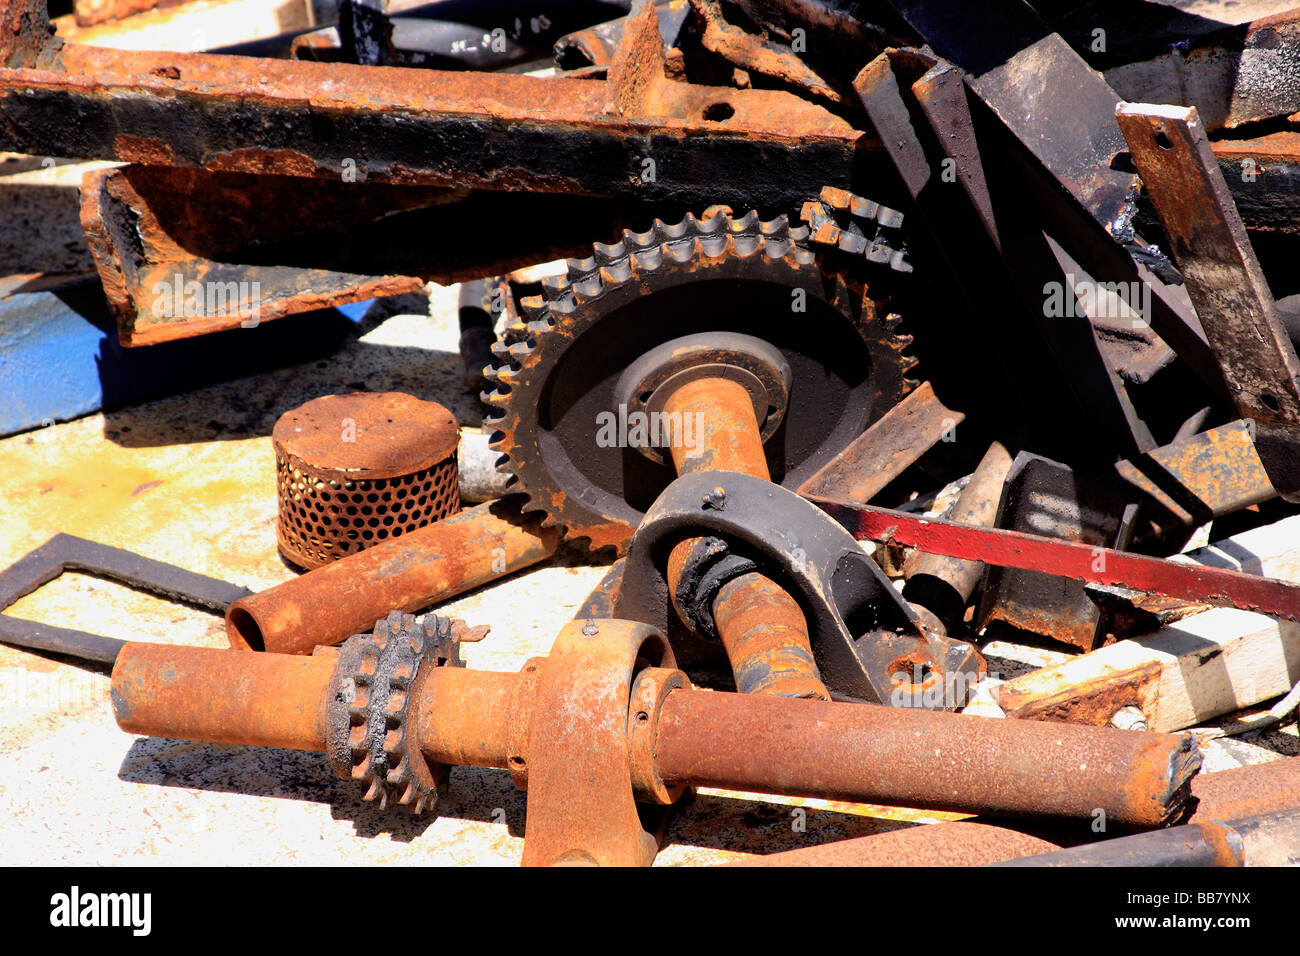 Assortment of old, rusted commercial fishing boat parts, Greenport